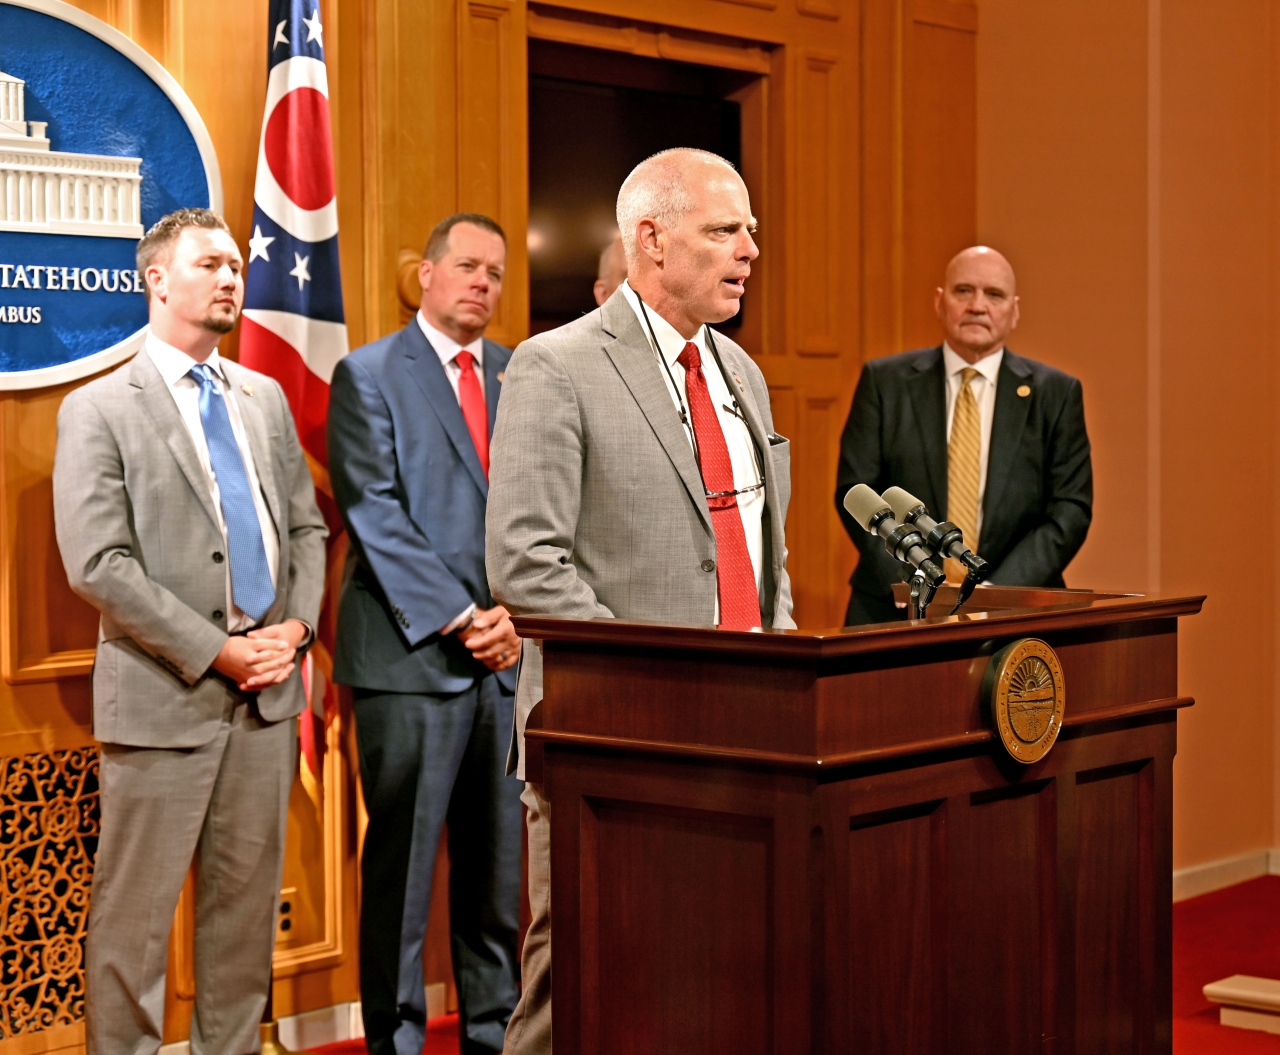 Rep. Bird explains the Ohio Homeowners Relief Act during a press conference.